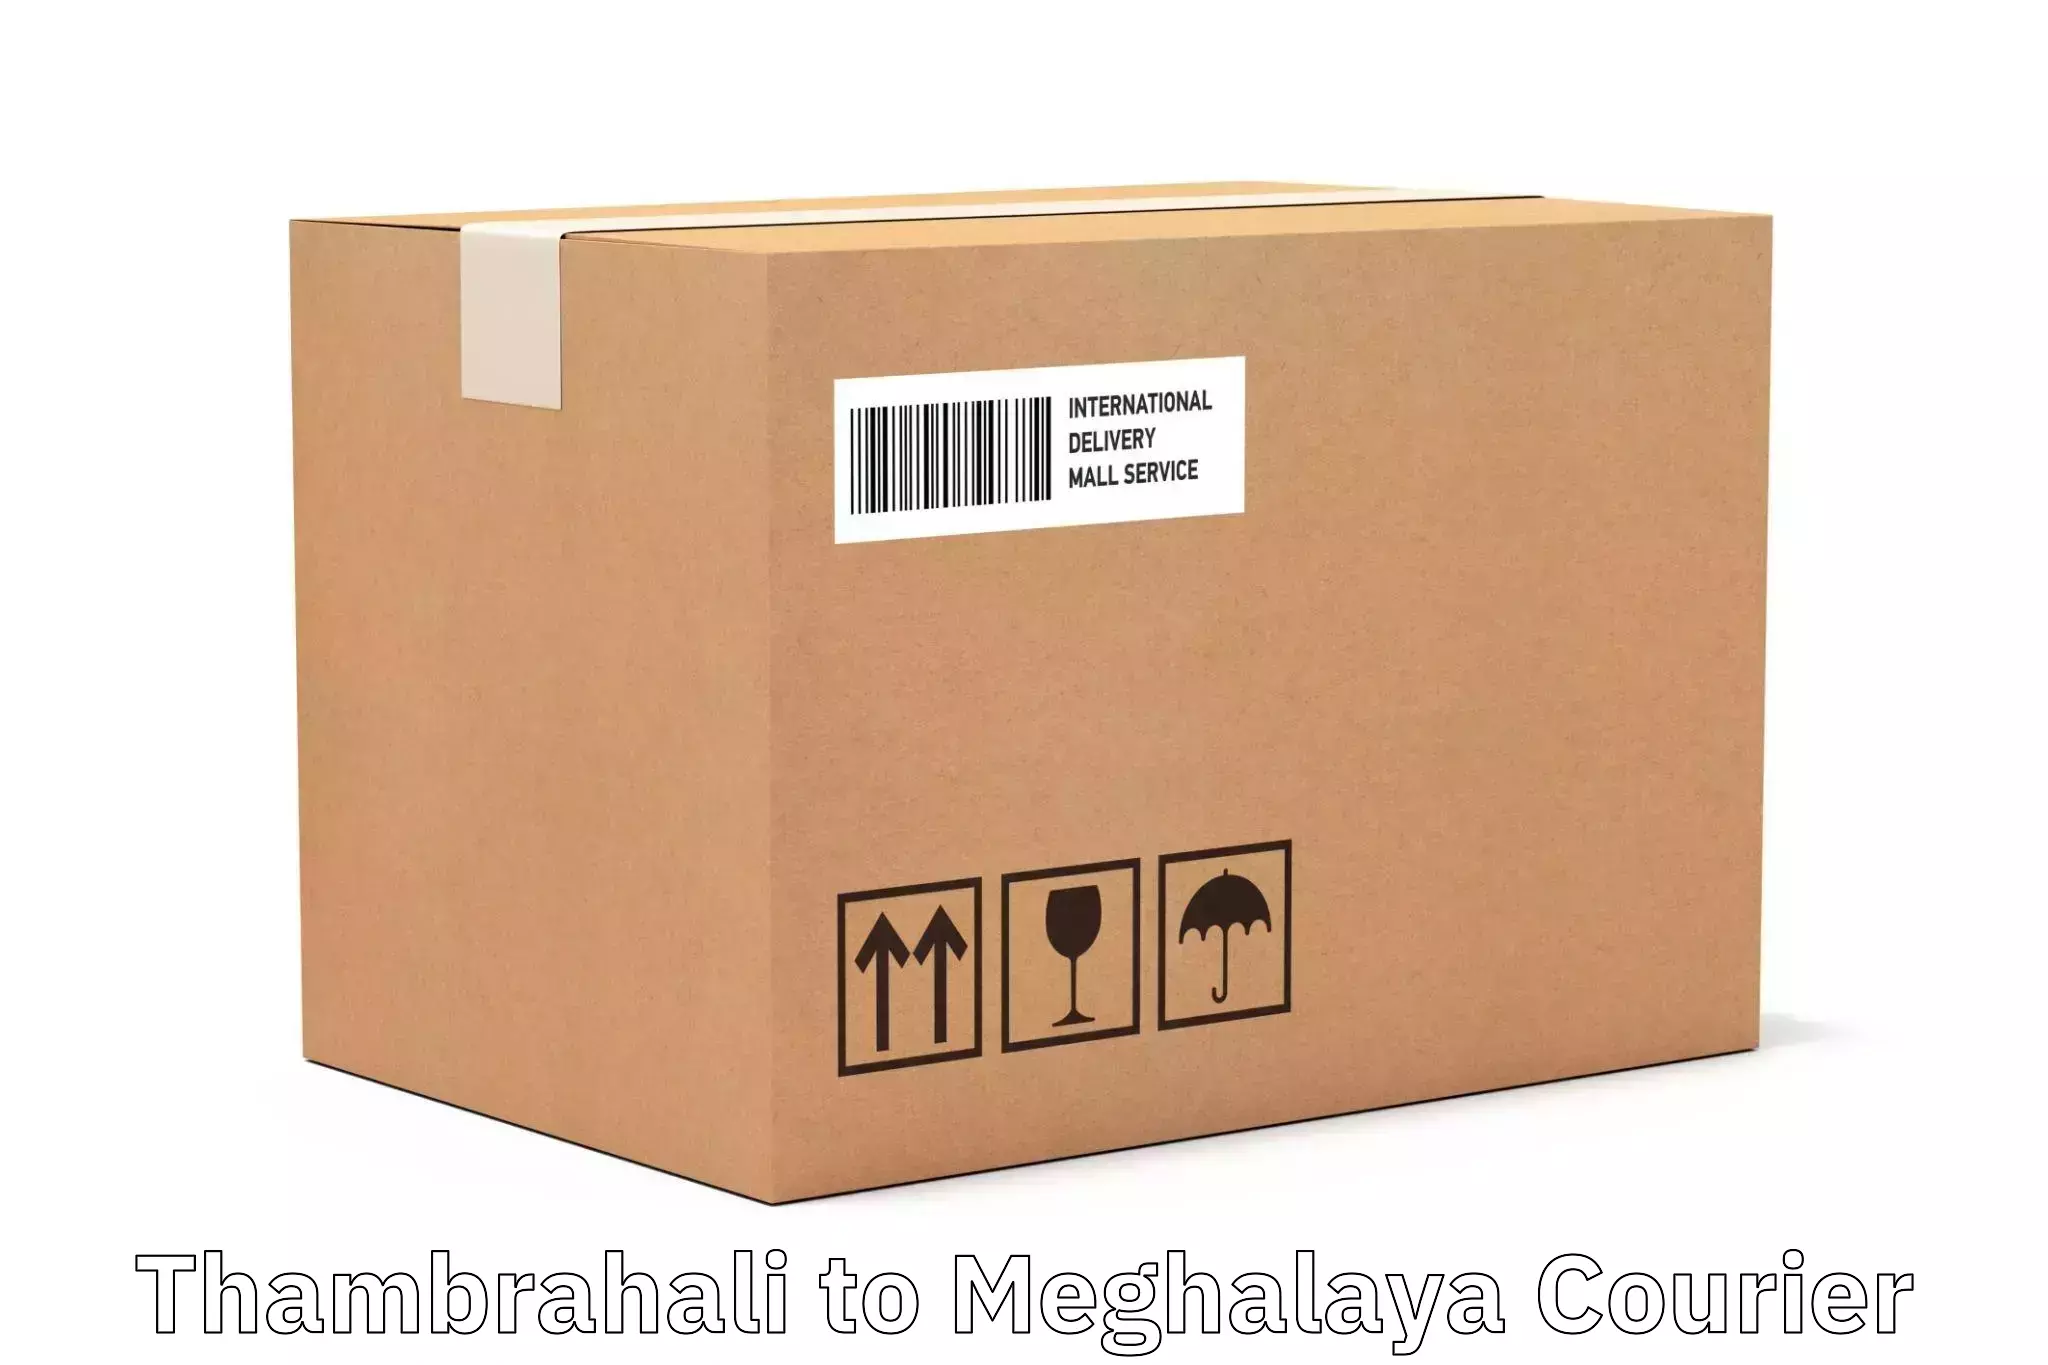 Nationwide parcel services Thambrahali to Tura